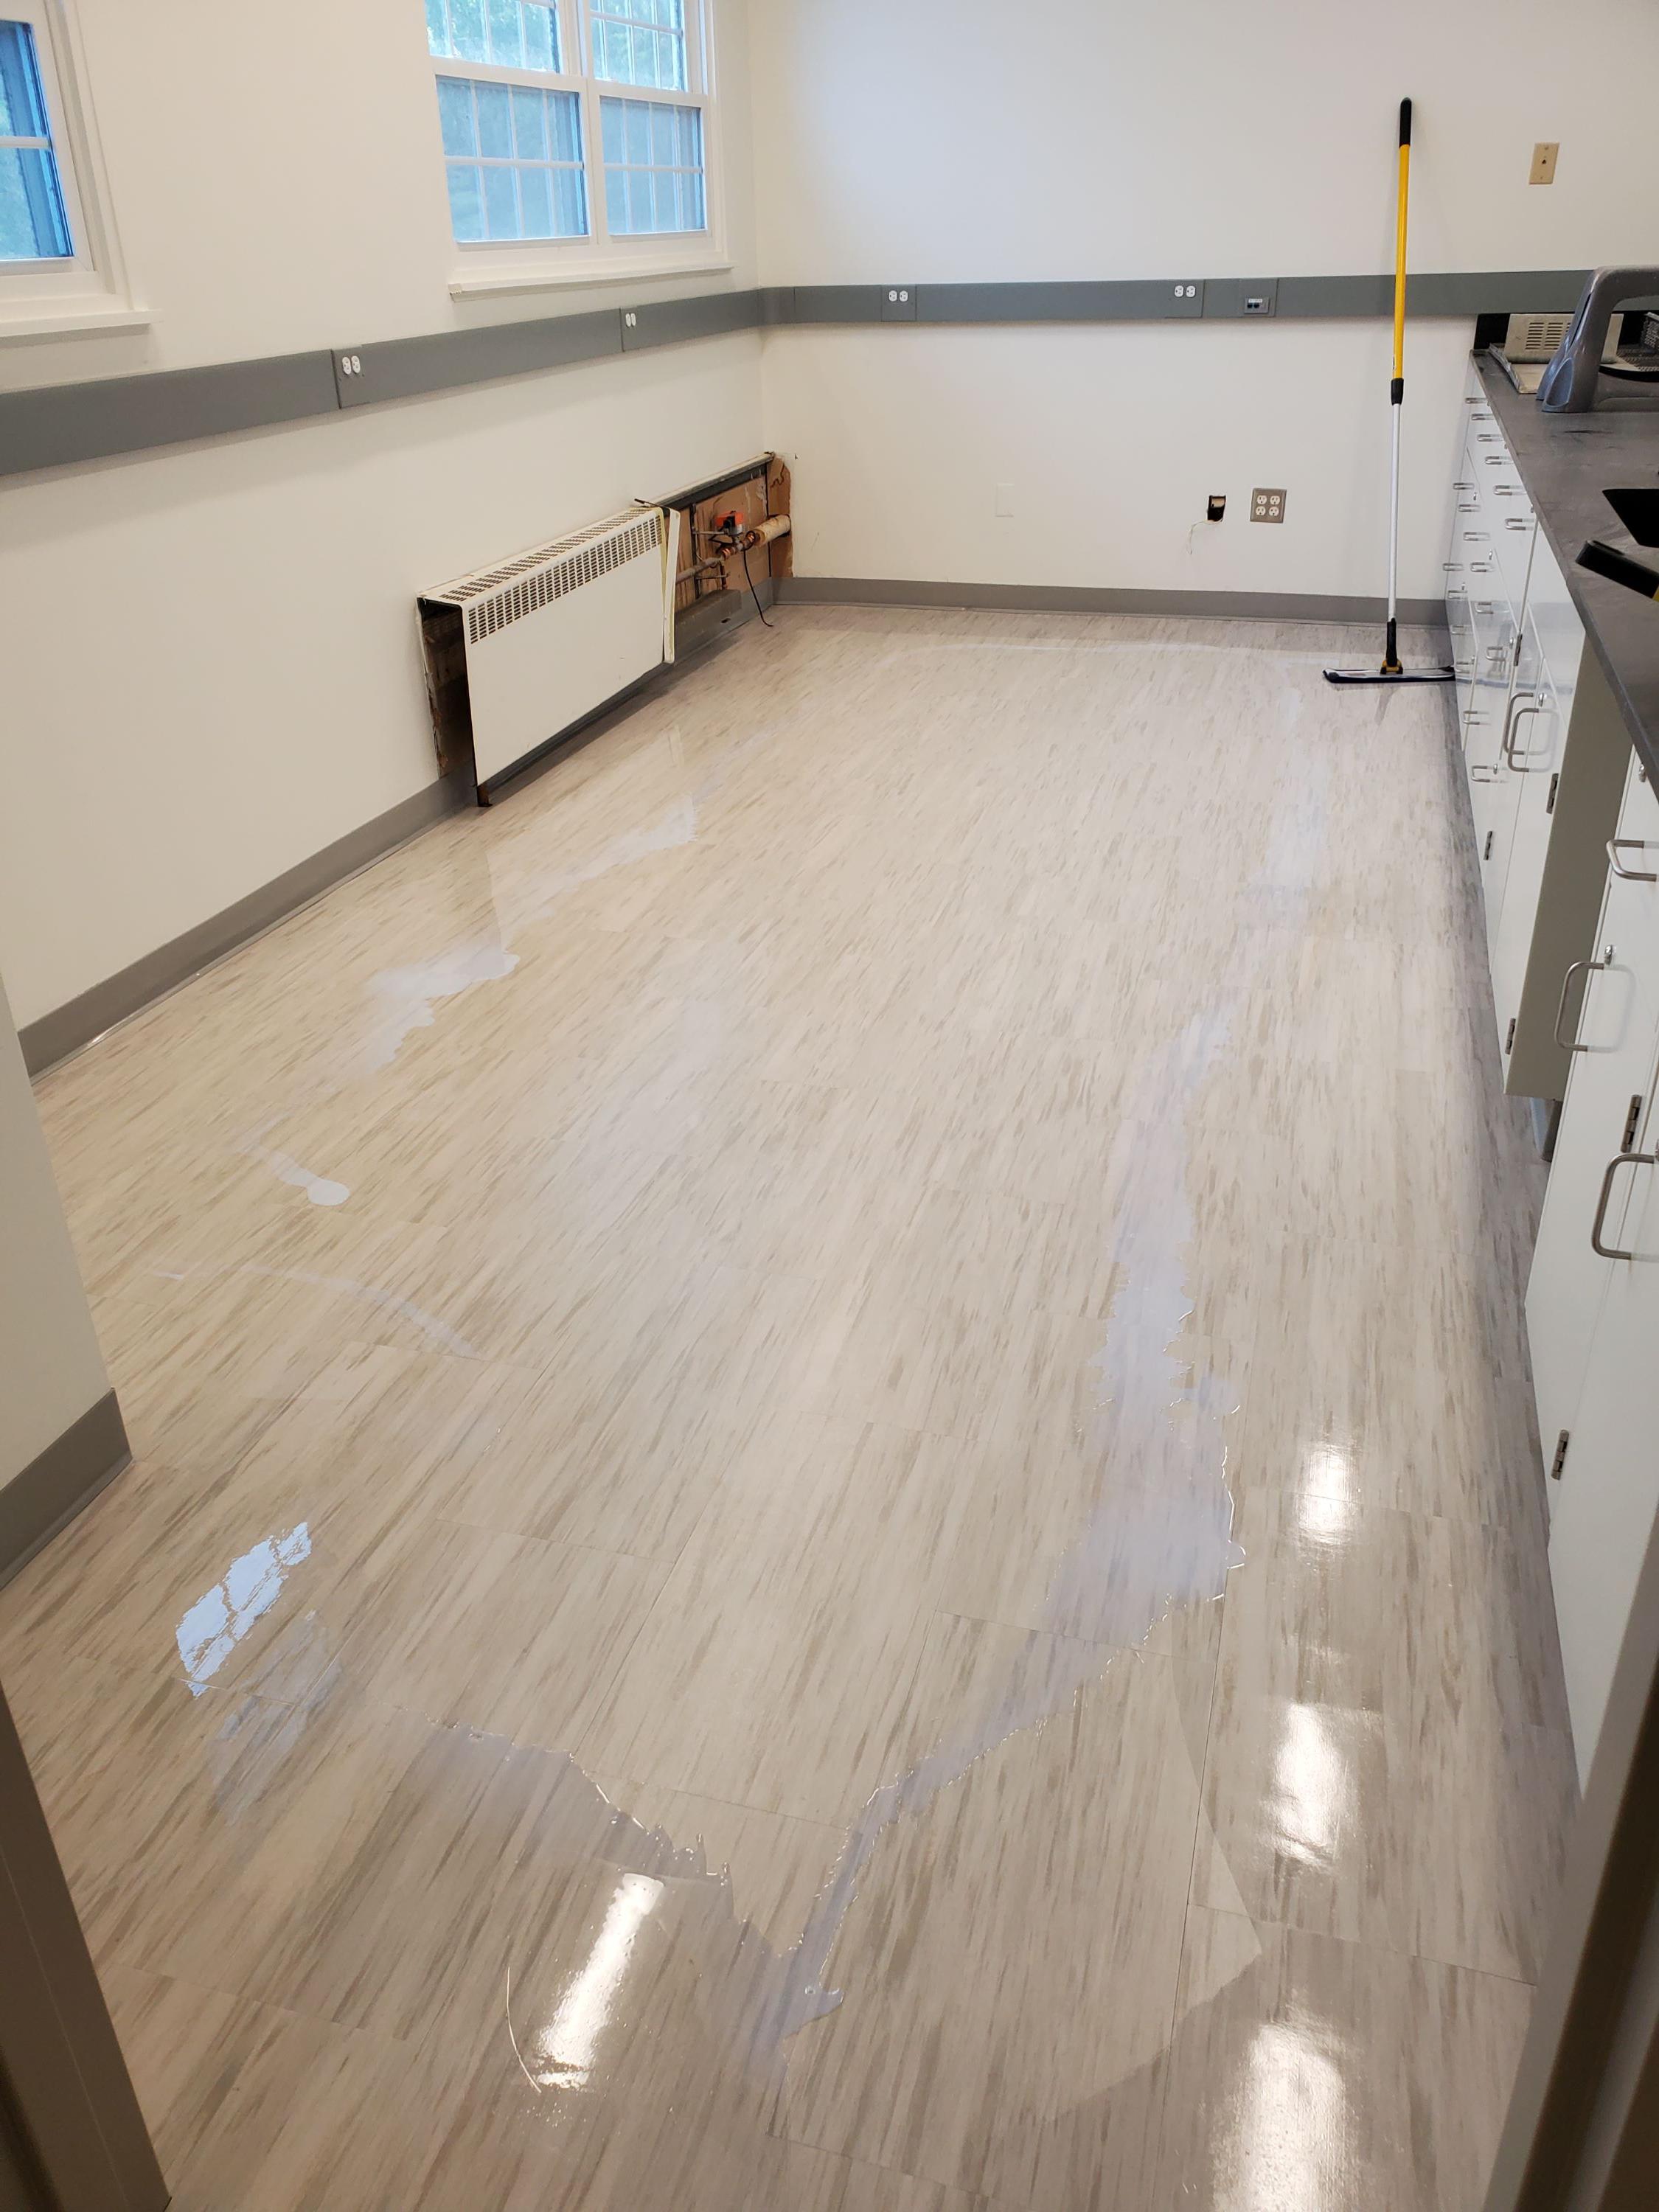 Our commercial cleaning services at Tri Town Property Services LLC cater to the unique requirements  Tri Town Property Services LLC Wareham (774)628-8627